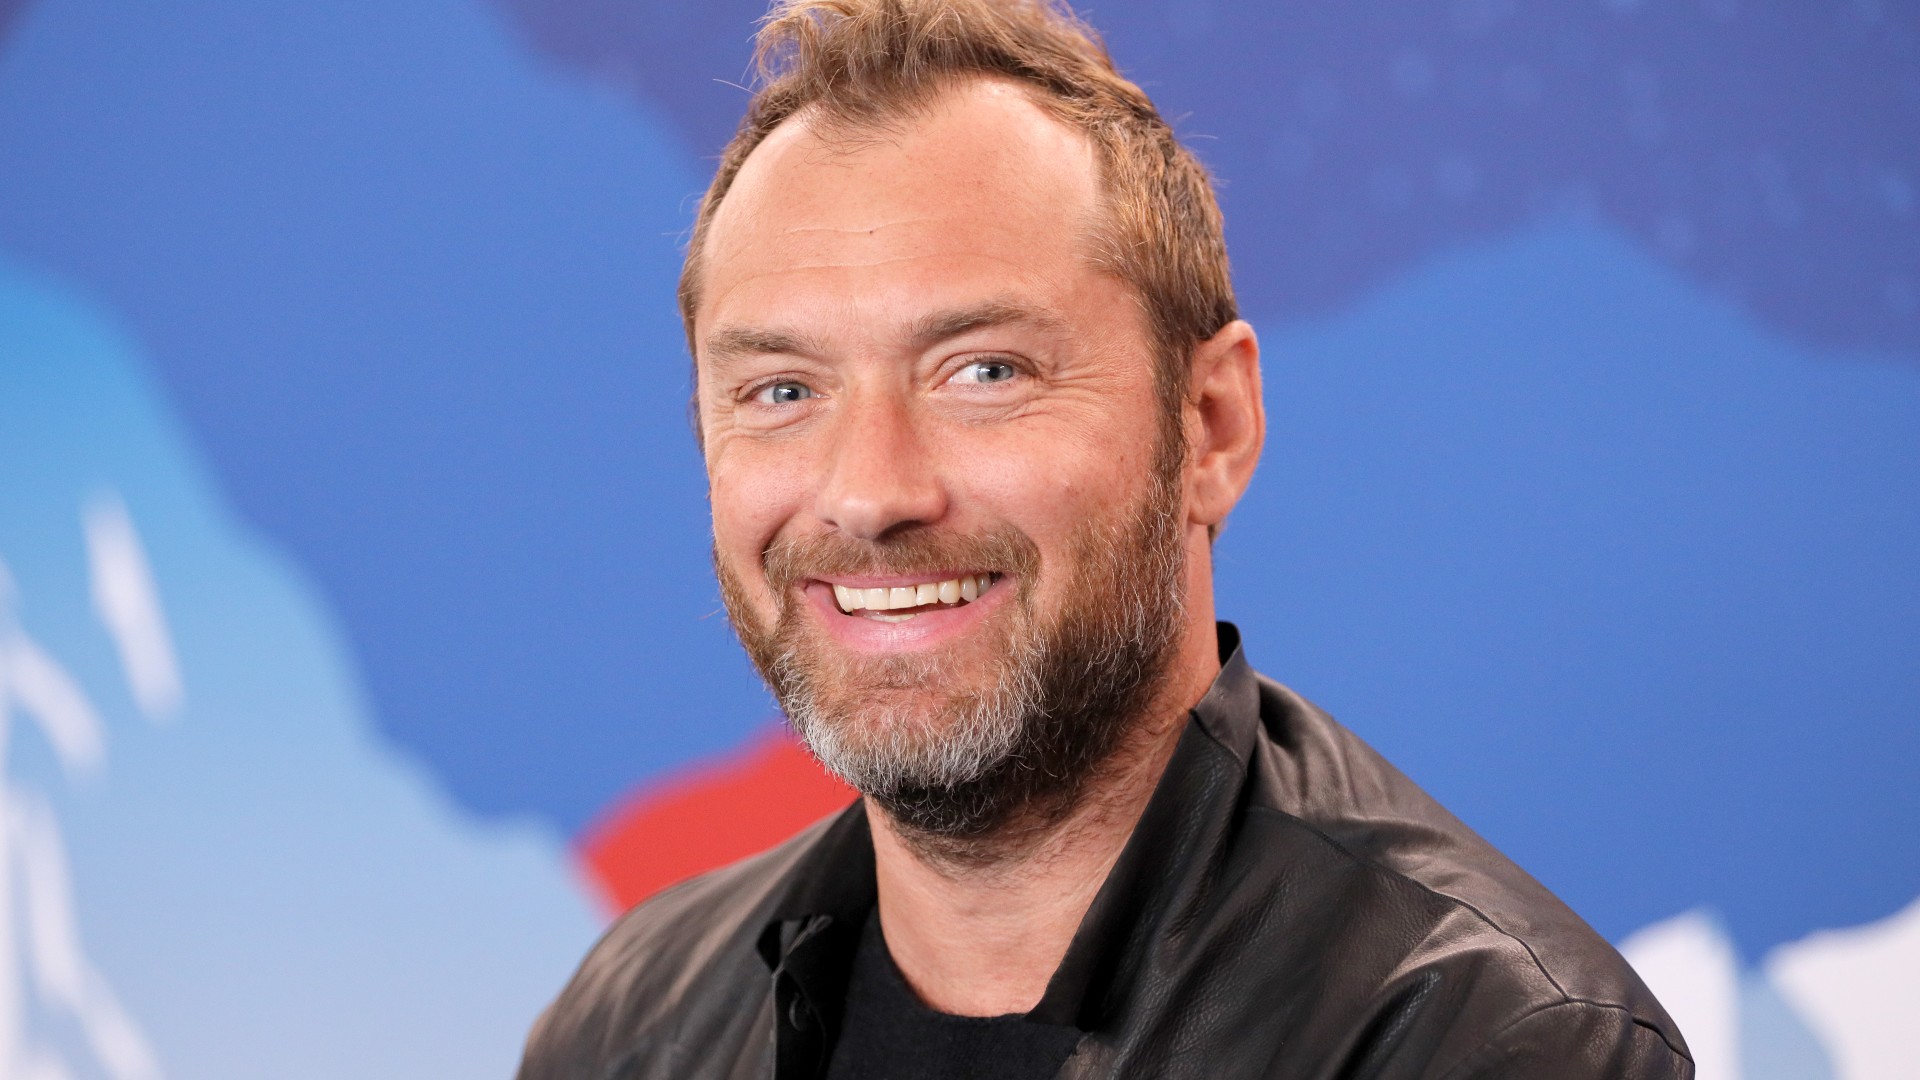 Casting News: Jude Law to Play King Henry VIII Opposite Michelle Williams' Queen Catherine Parr in Tudor Movie 'Firebrand'